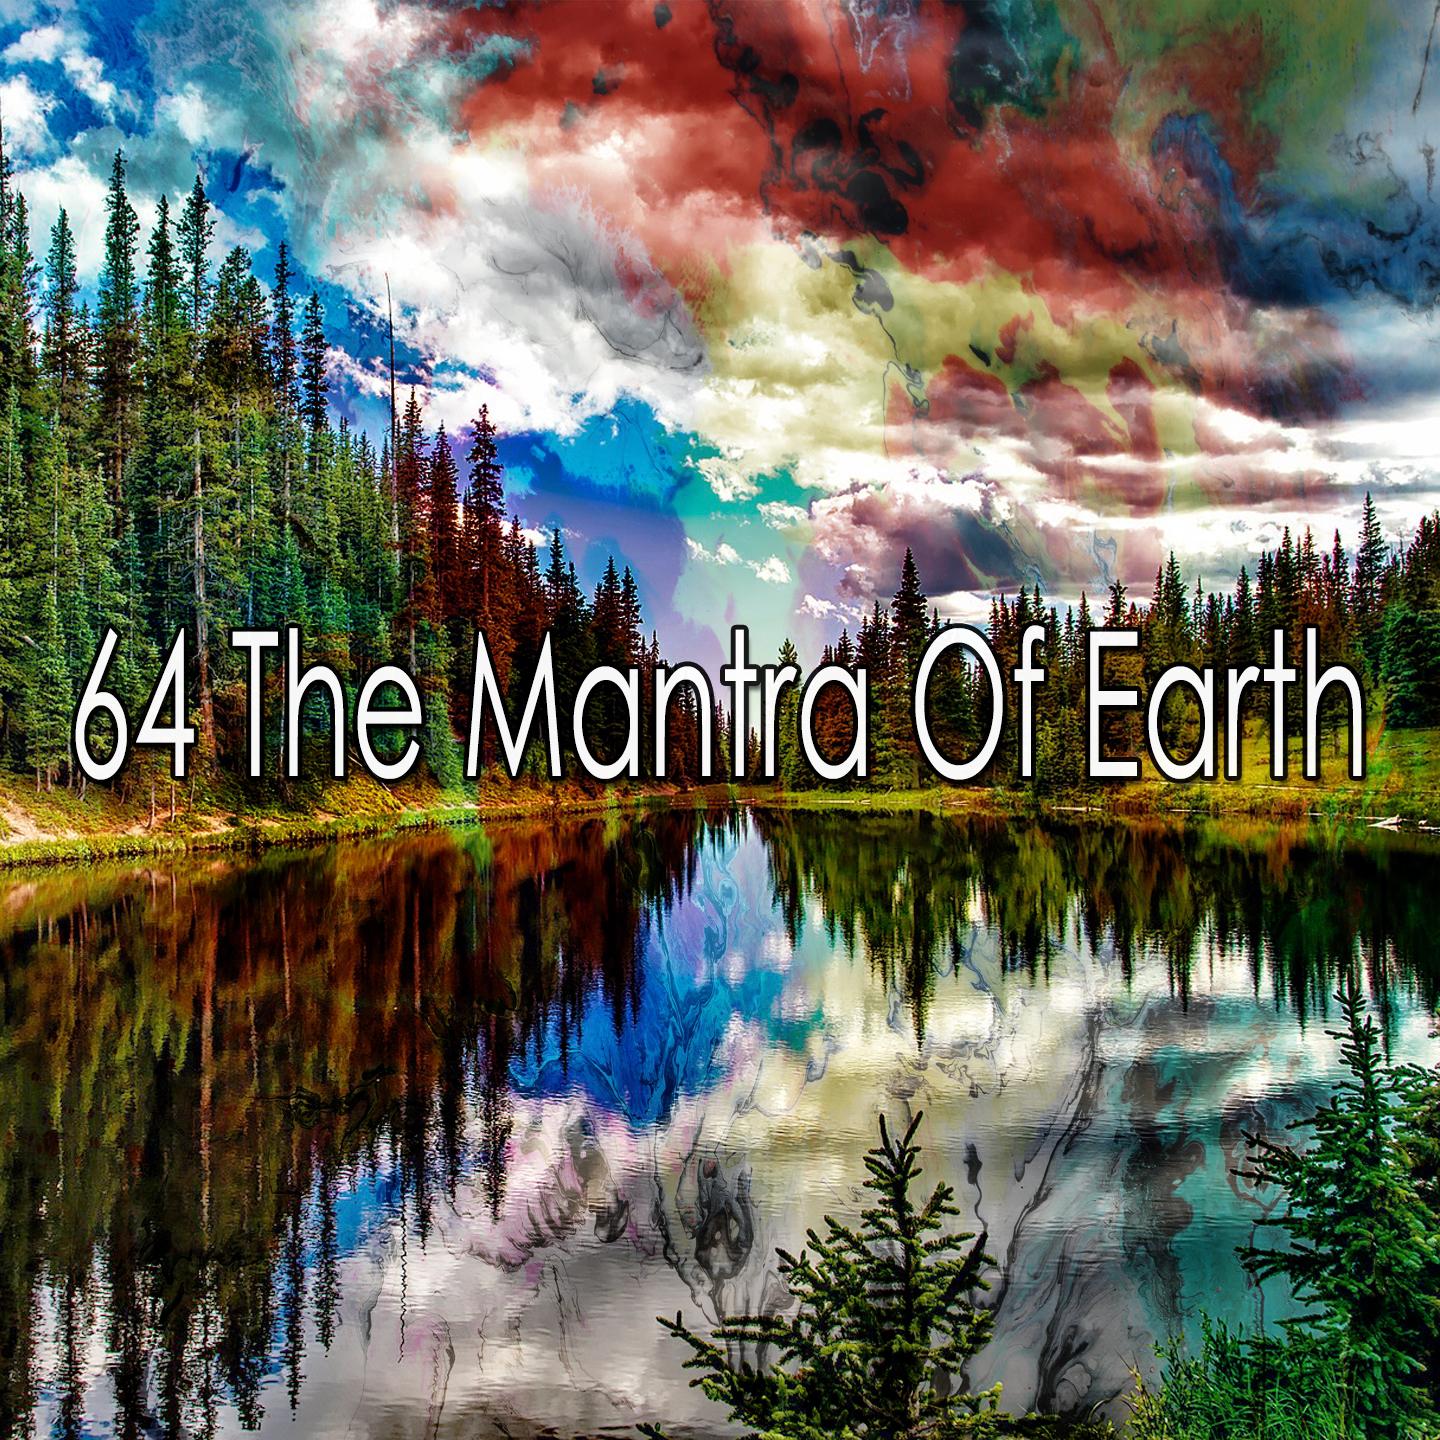 64 The Mantra of Earth